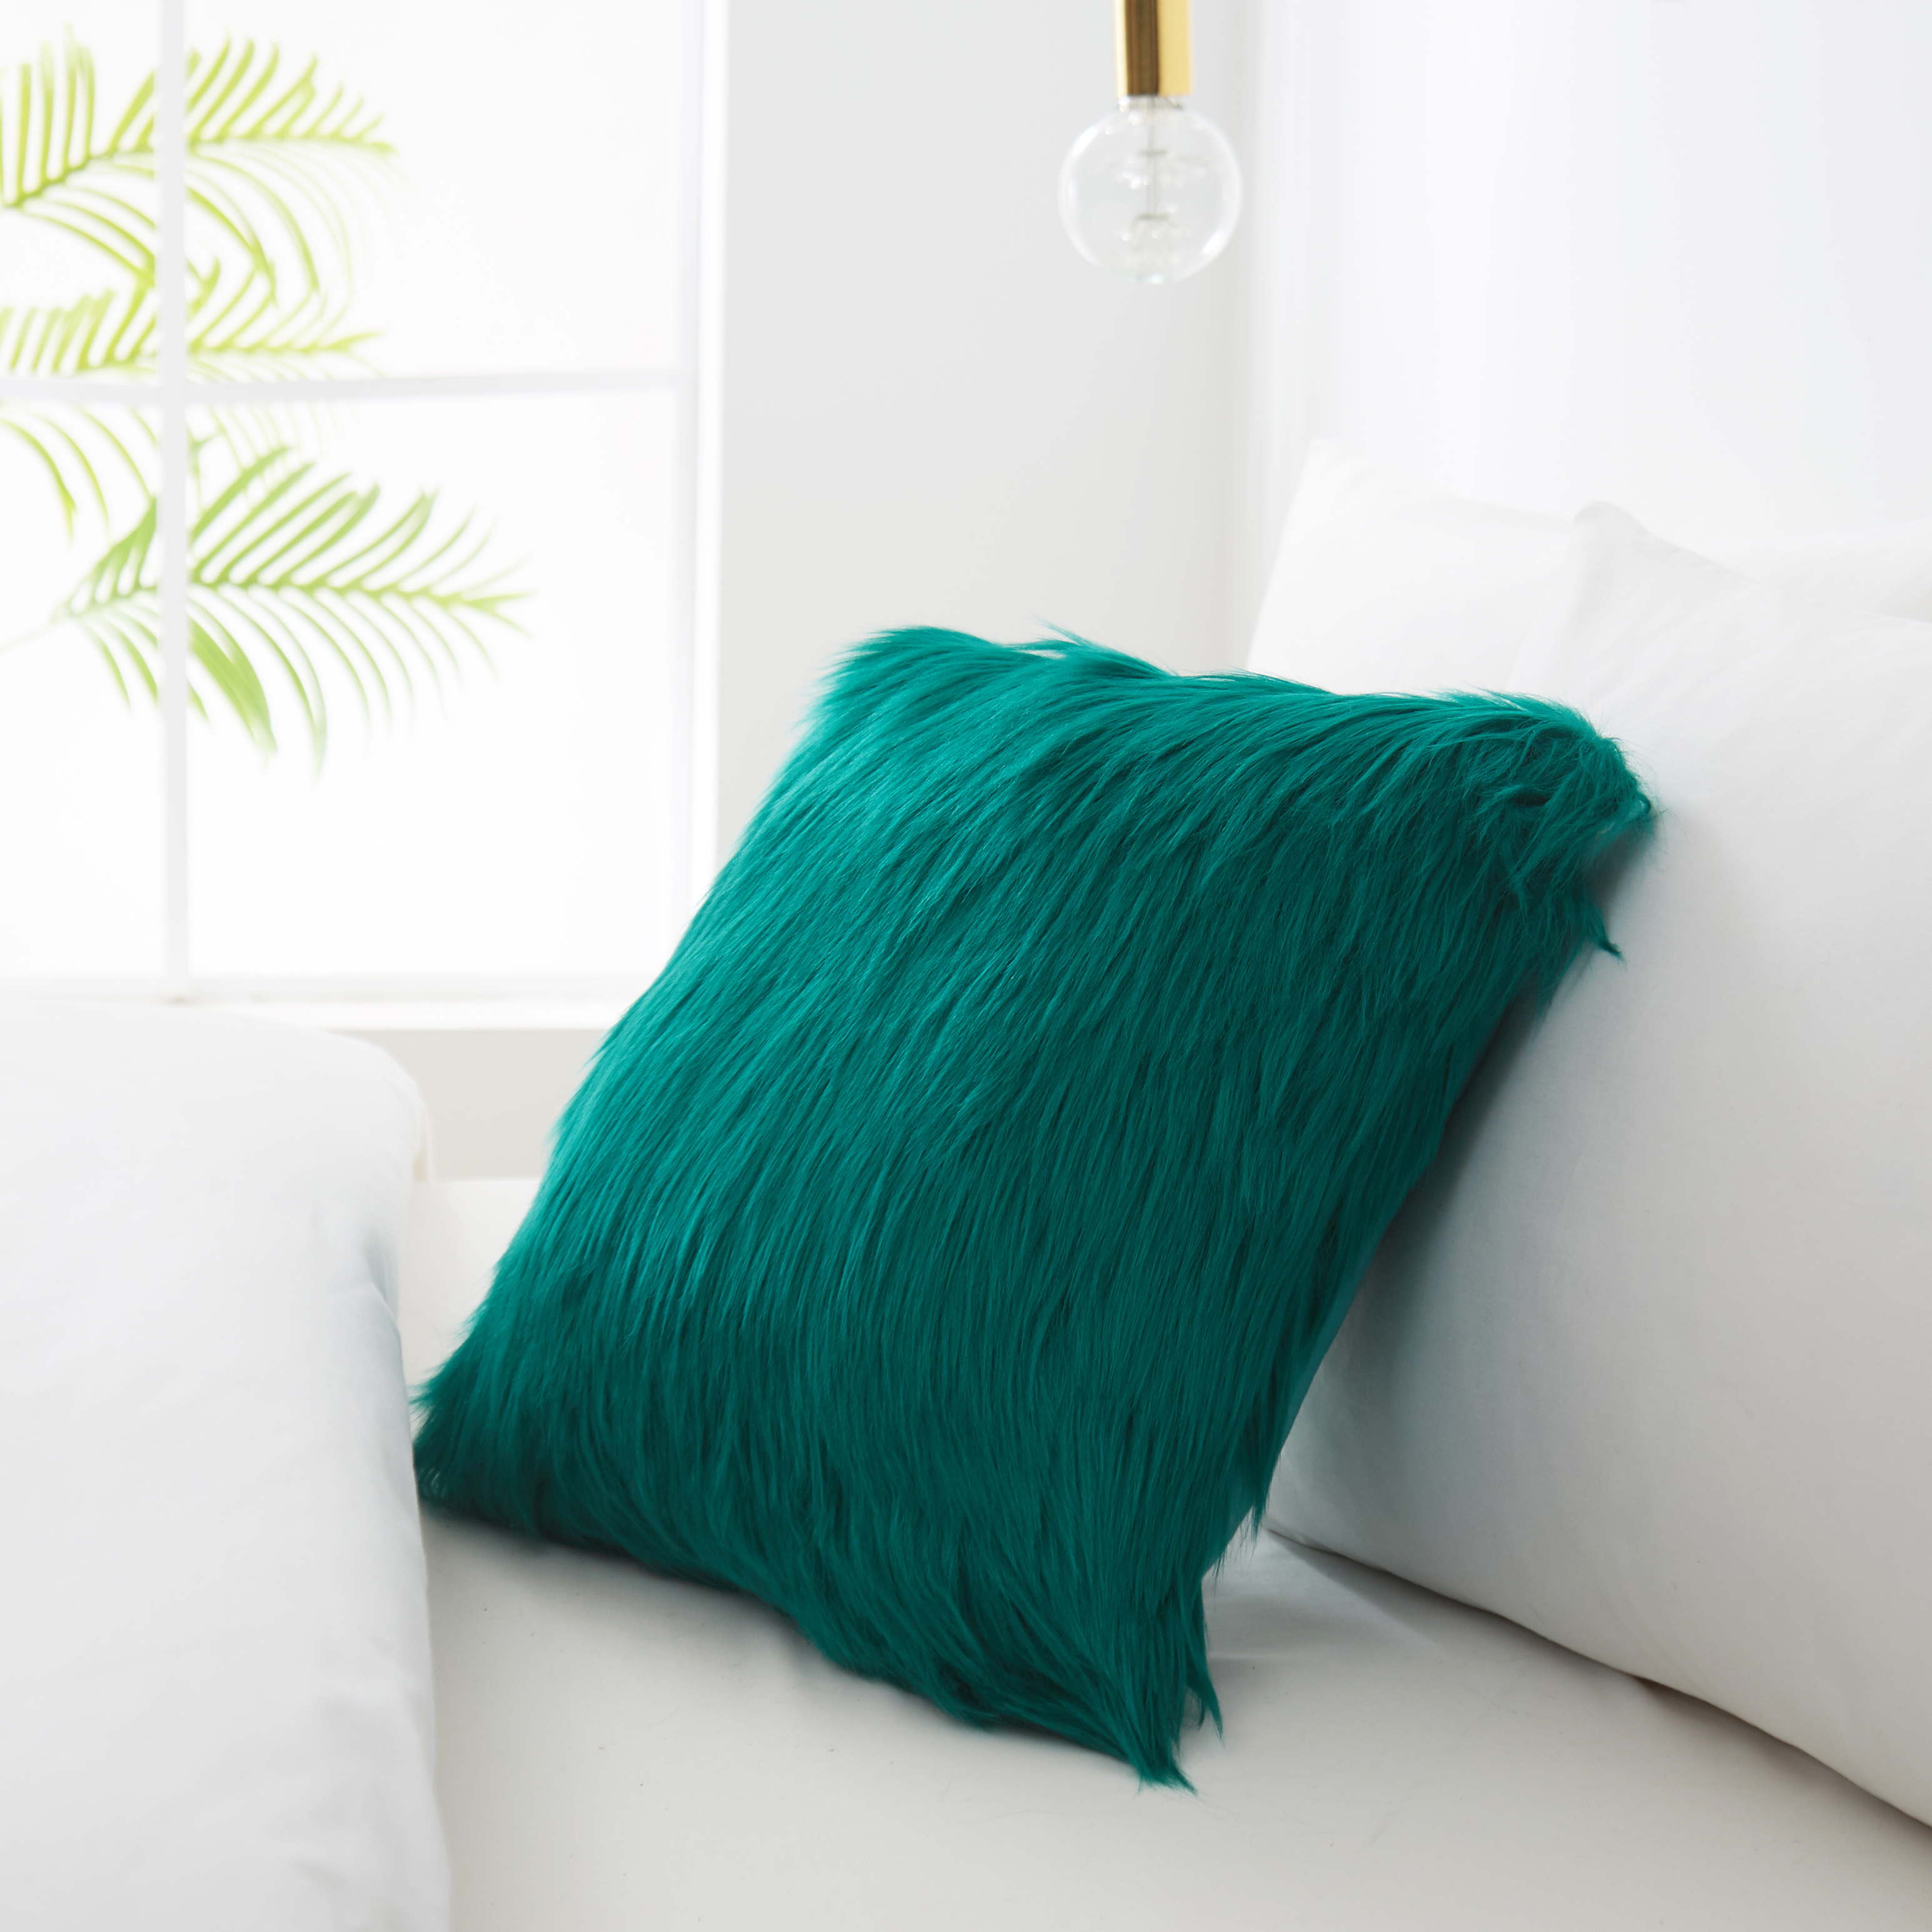 Your Zone Mainstays Flokati Decorative Throw Pillow 16" x 16", Green - image 2 of 3